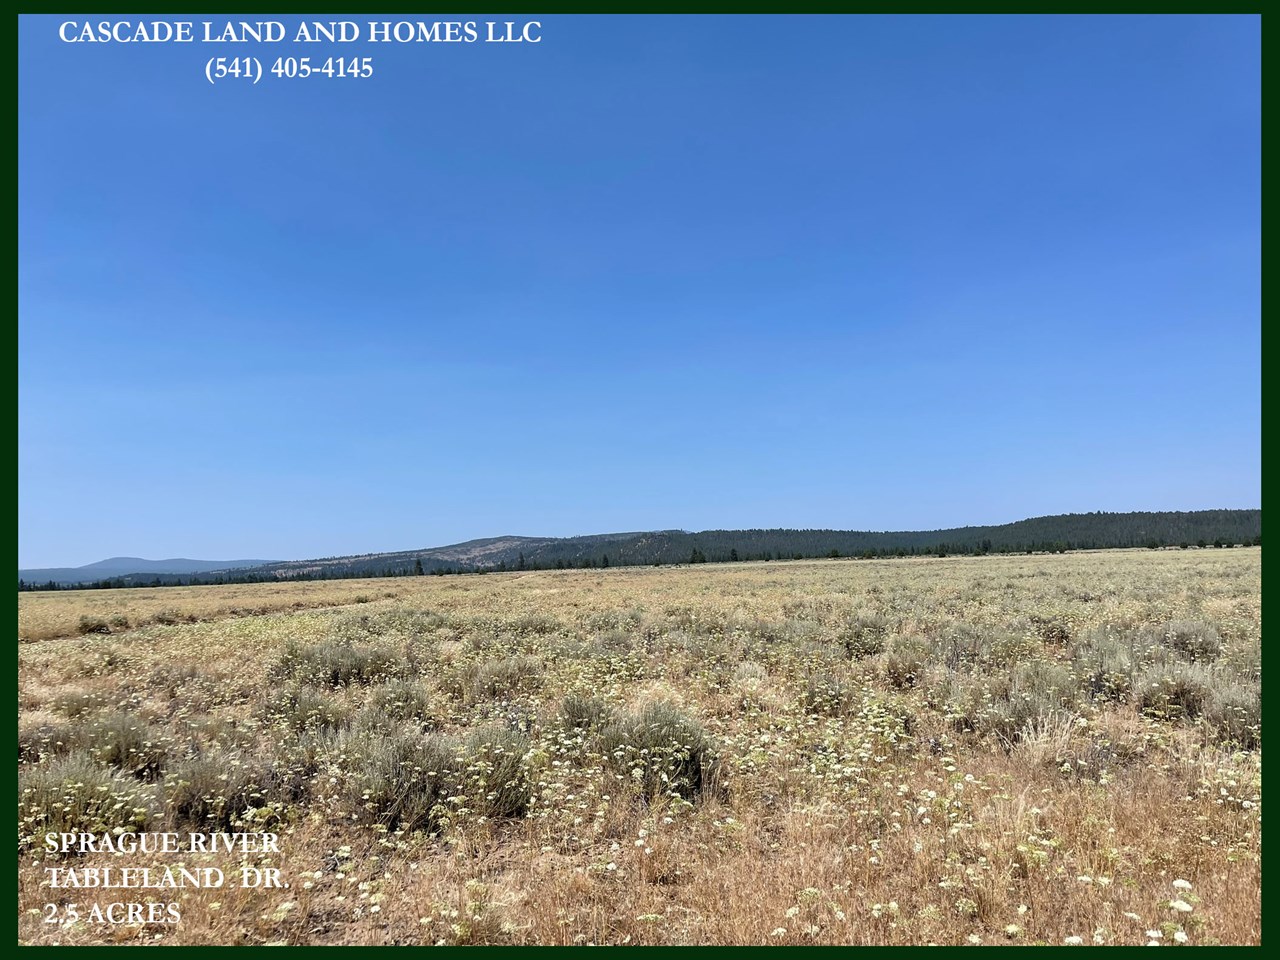 the property is on a high desert plateau in rural klamath county. the parcel is flat, to very mildly sloped, it is covered with native vegetation, and has beautiful views of the surrounding territory.